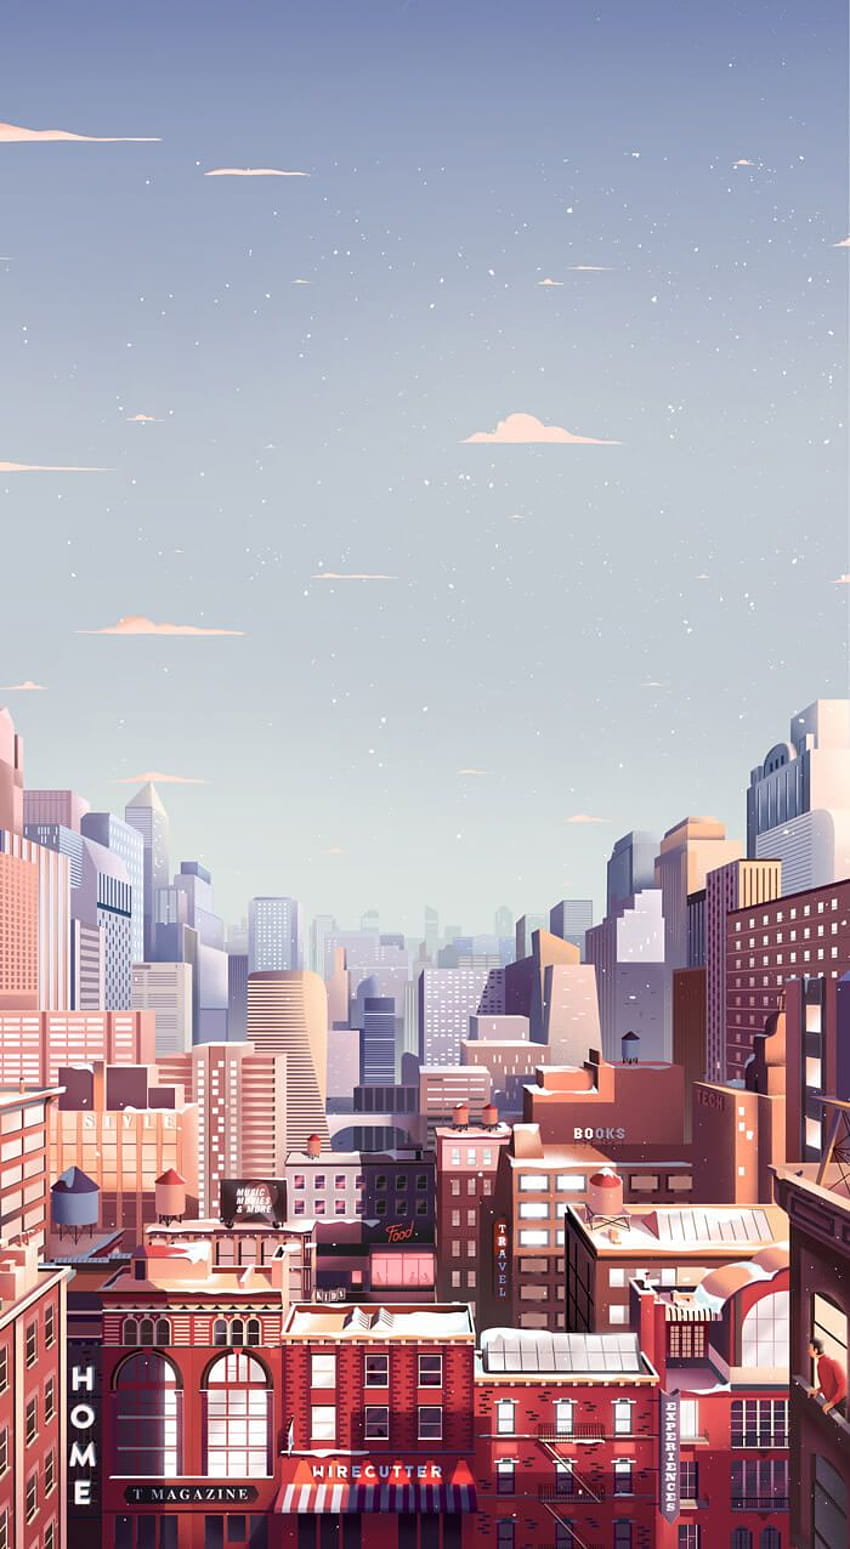 Colorful Inspiration For Gray Days: Illustration And graphy At Their Best, abstract skyline iphone HD phone wallpaper